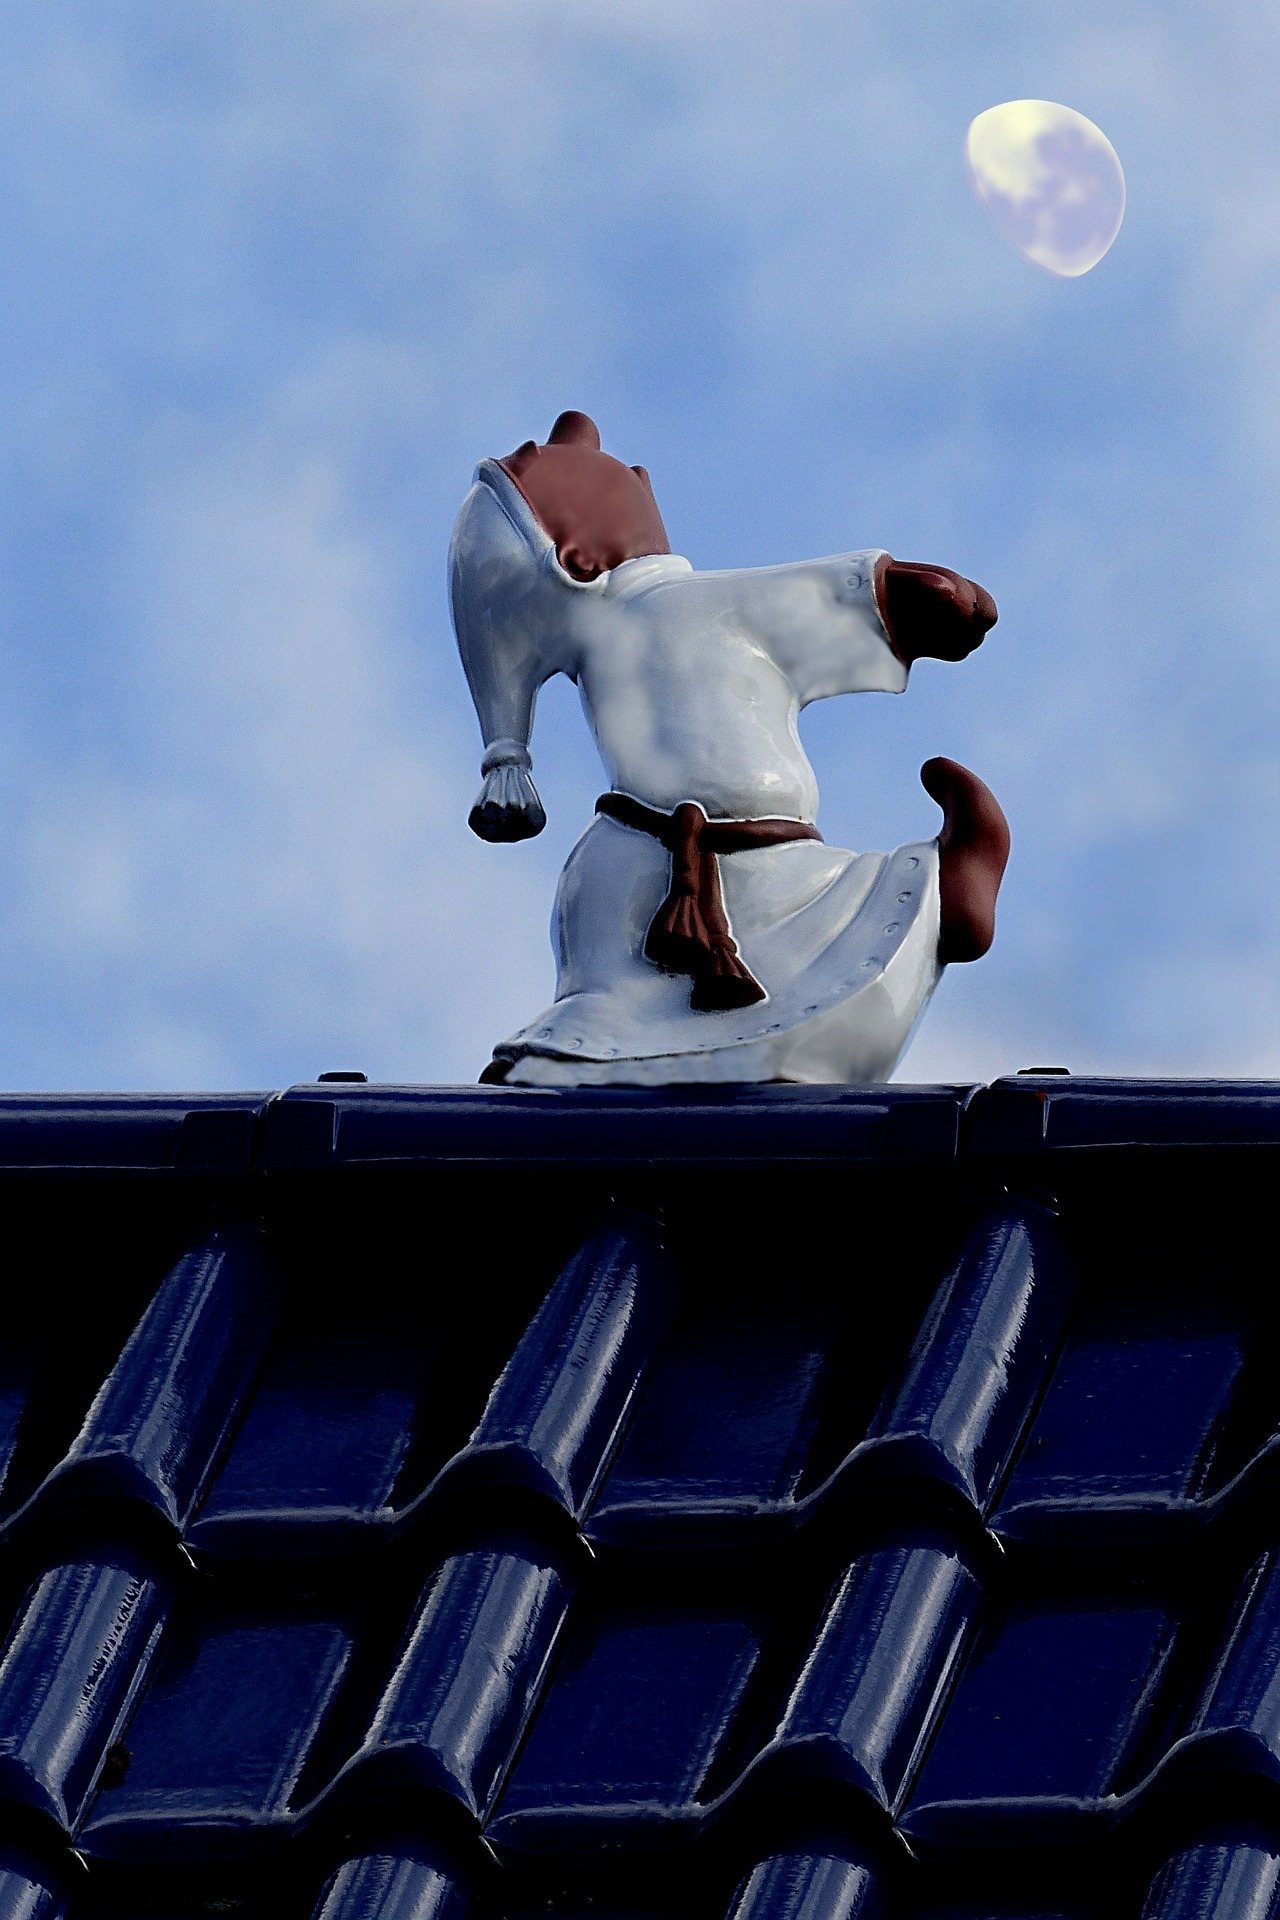 Image of a small statue of a man sleepwalking on top of a roof